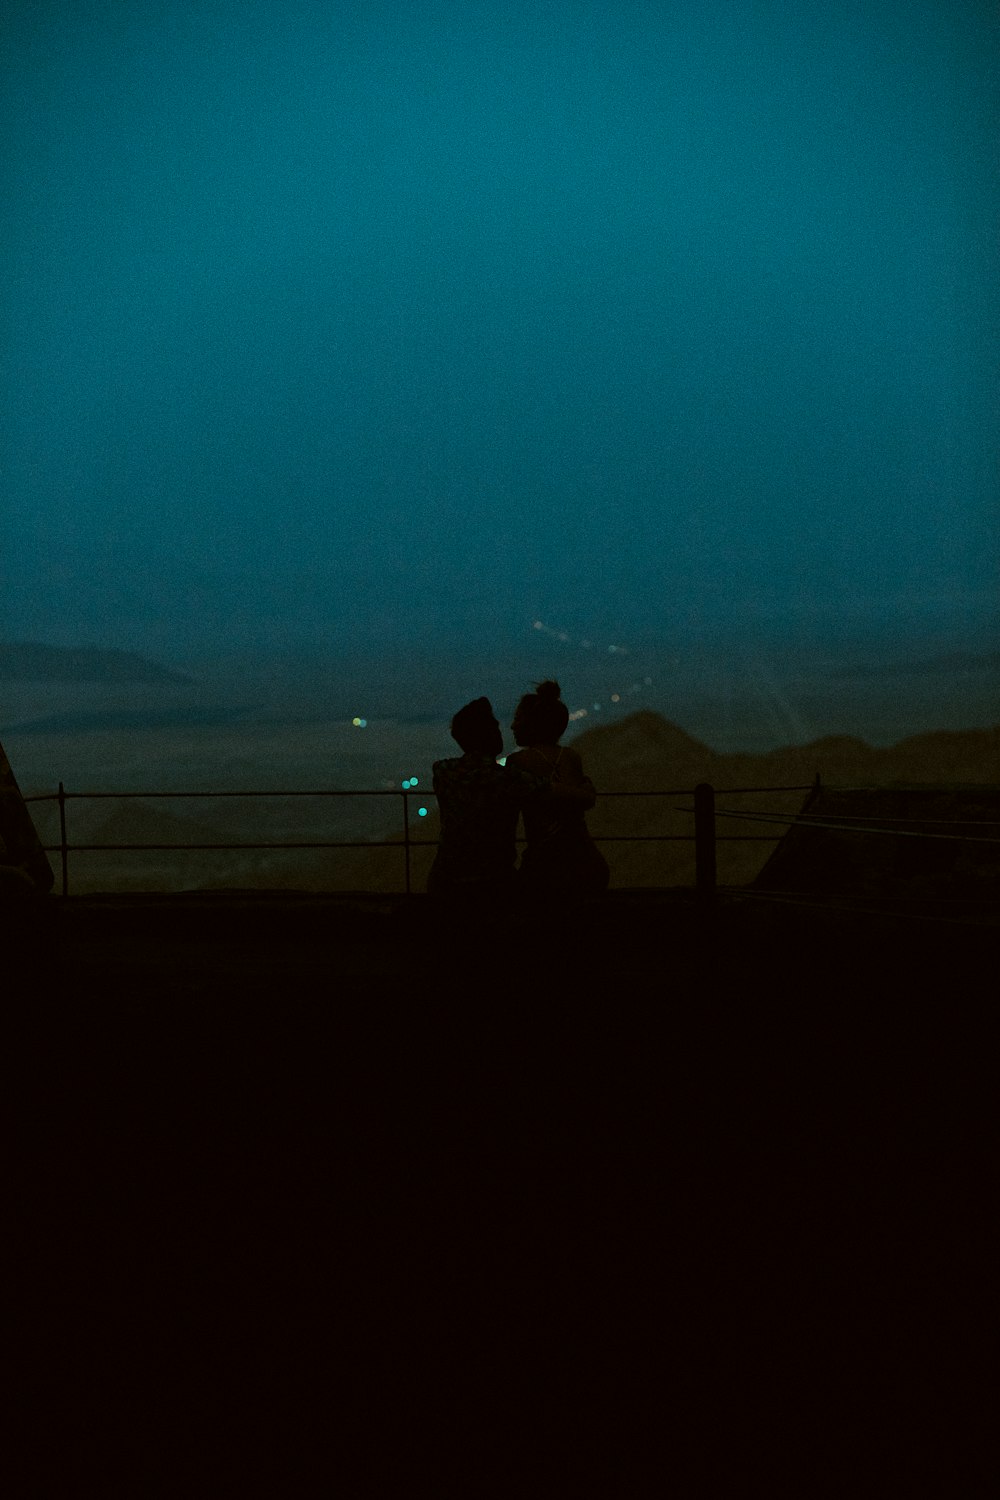 silhouette of 2 person standing on the fence during night time